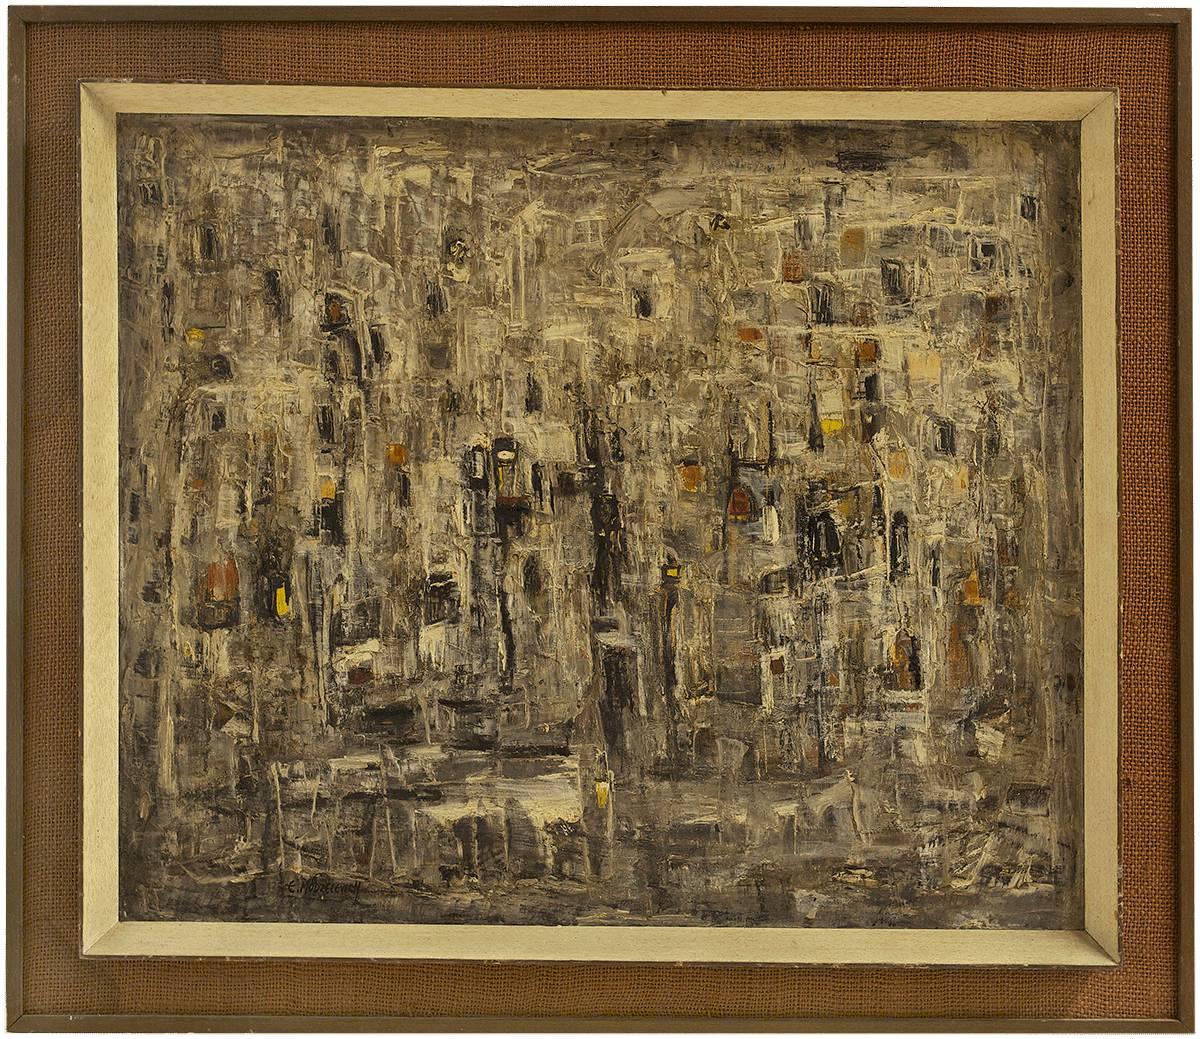 Raffi Kaiser Landscape Painting - Israeli Modernist Abstract Expressionist "Winter" Cityscape Oil Painting